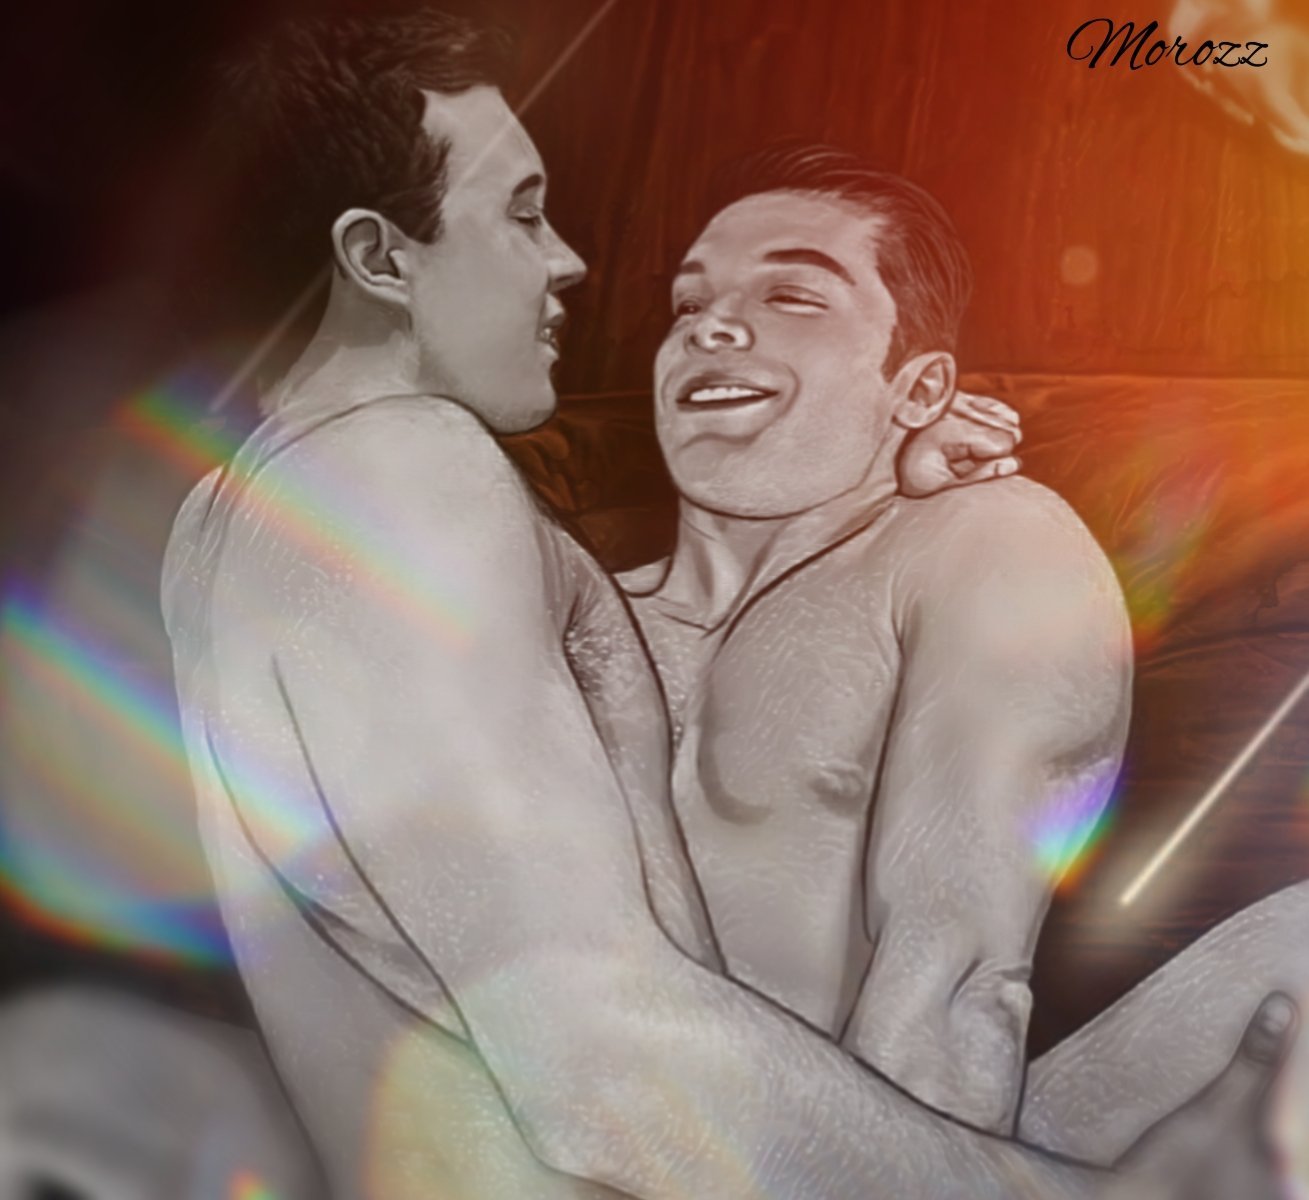 Sex kingsgallavich:Morozz is one of my favorite pictures